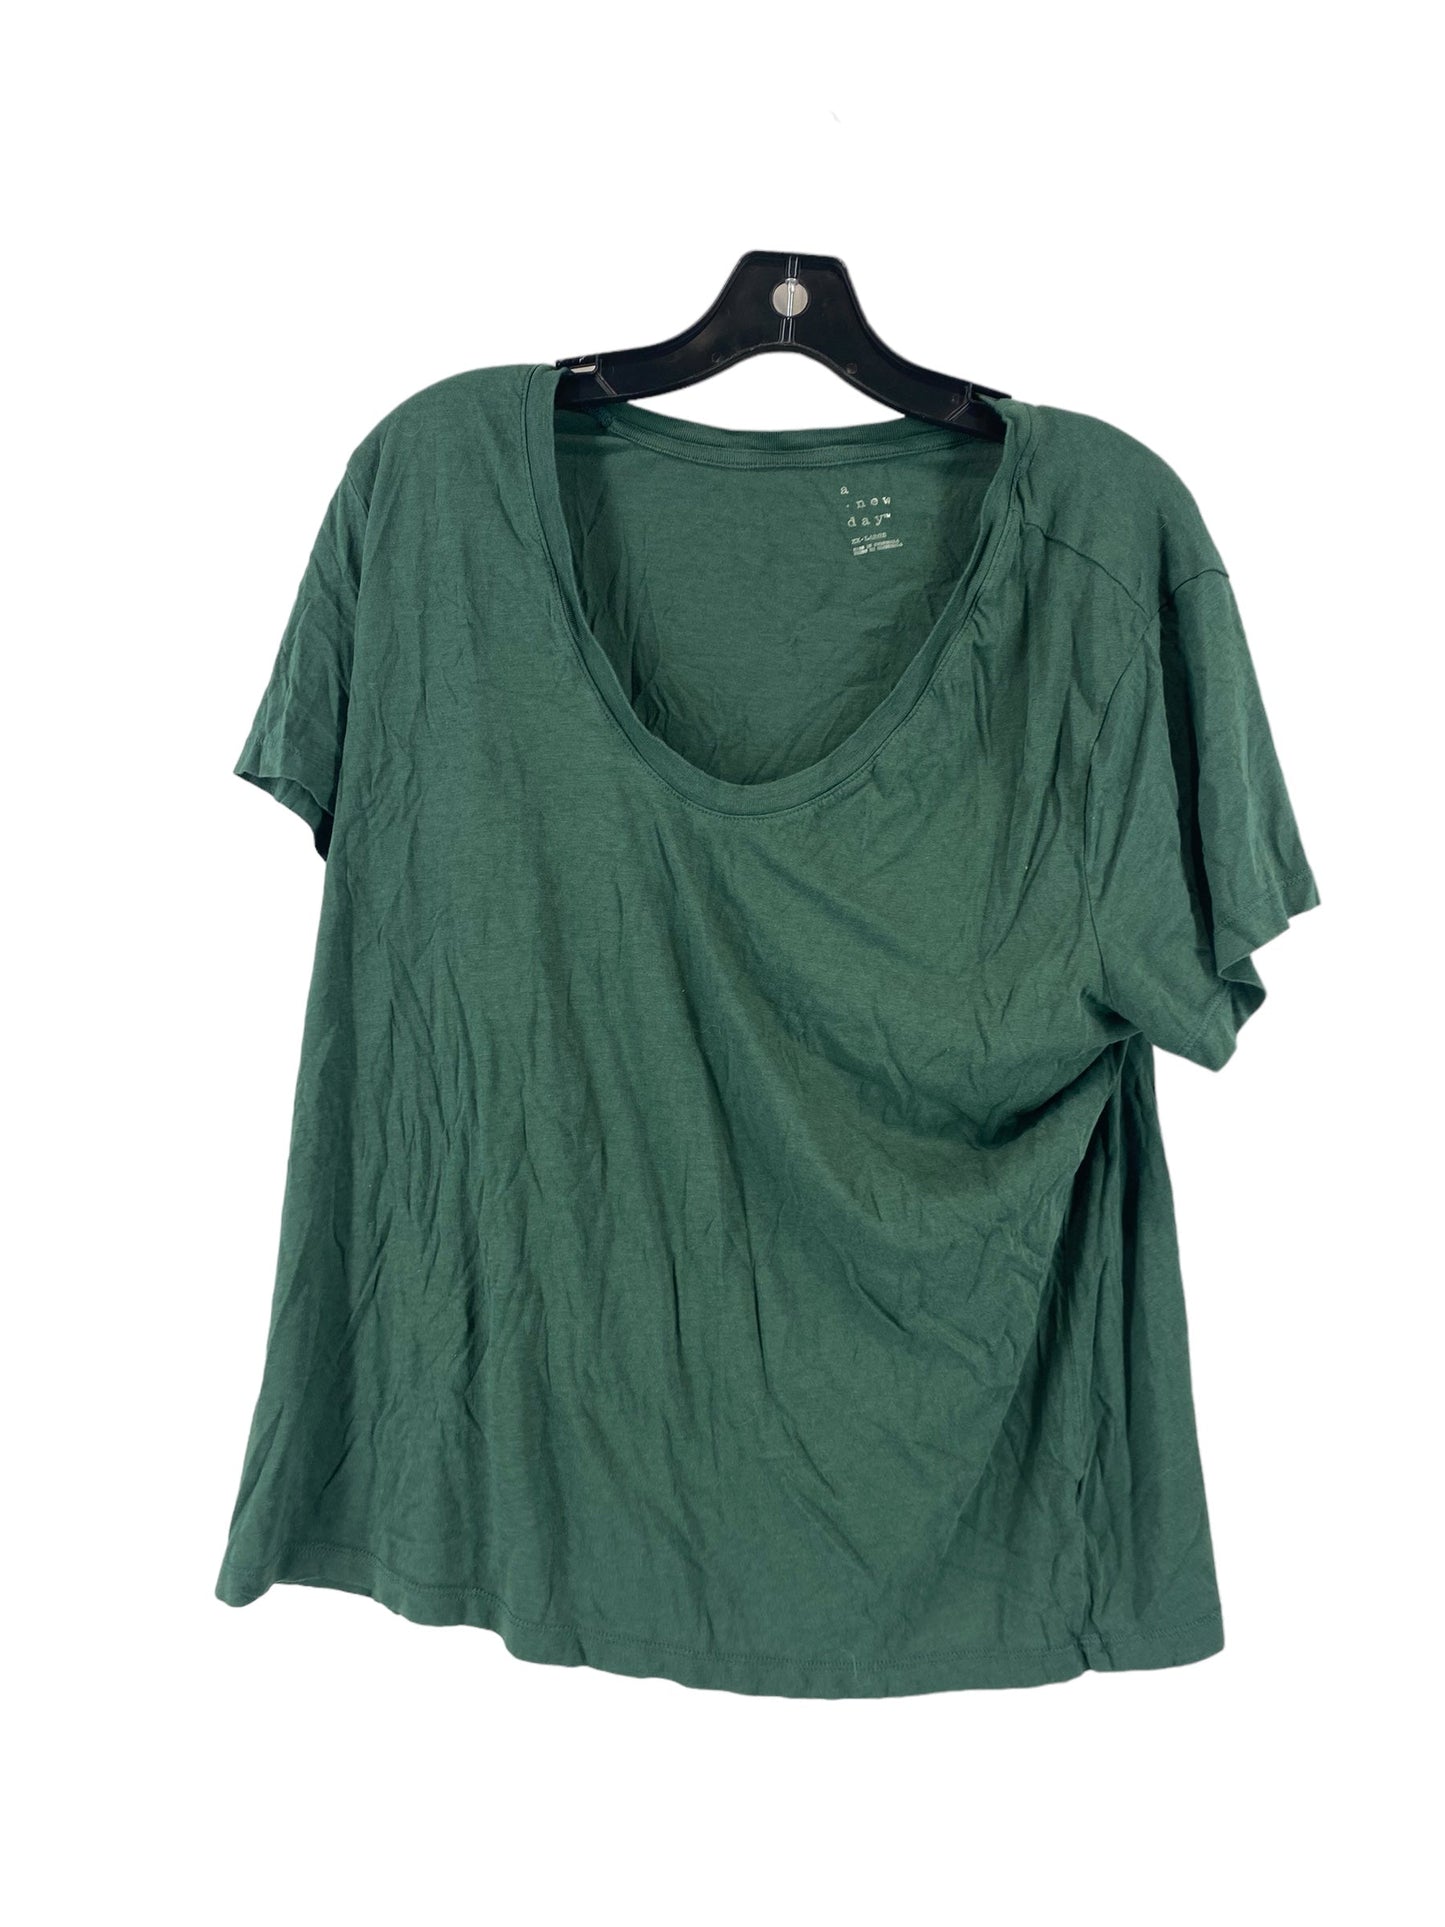 Green Top Short Sleeve Basic A New Day, Size 2x